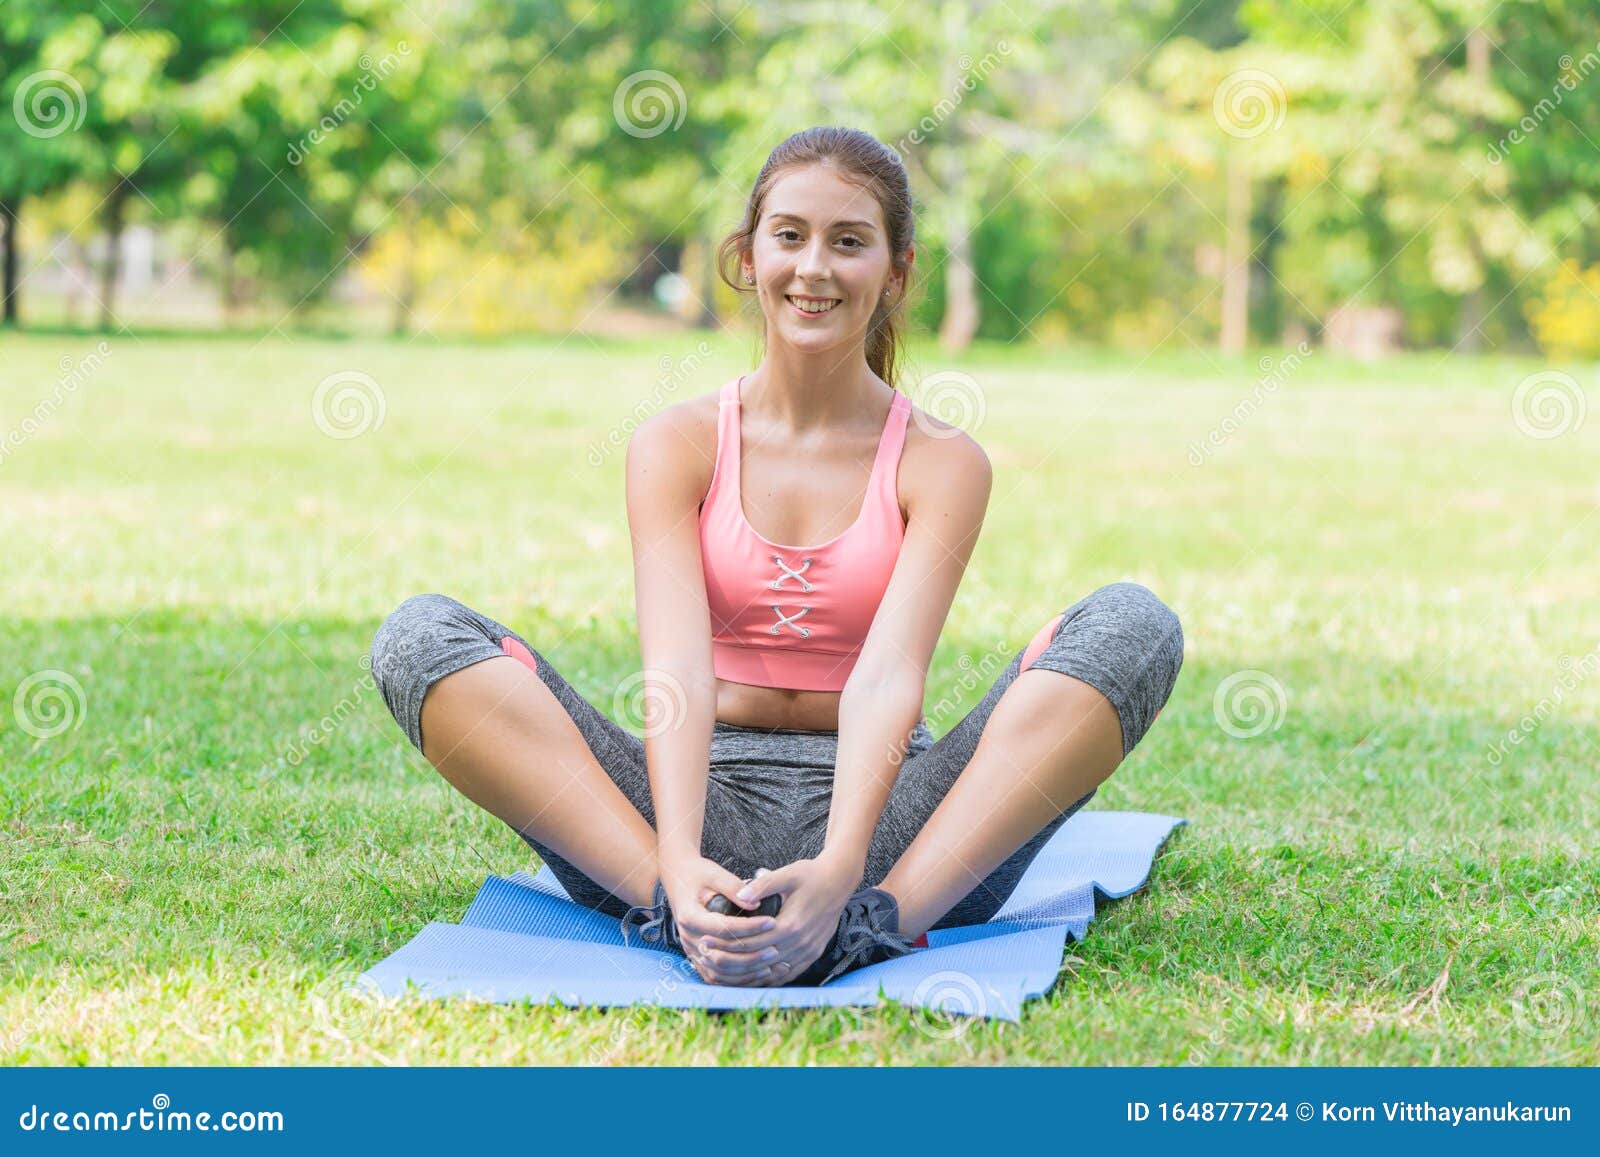 Cute Young Healthy Sport Teen Sitting Smiling on Yoga Mat Outdoor